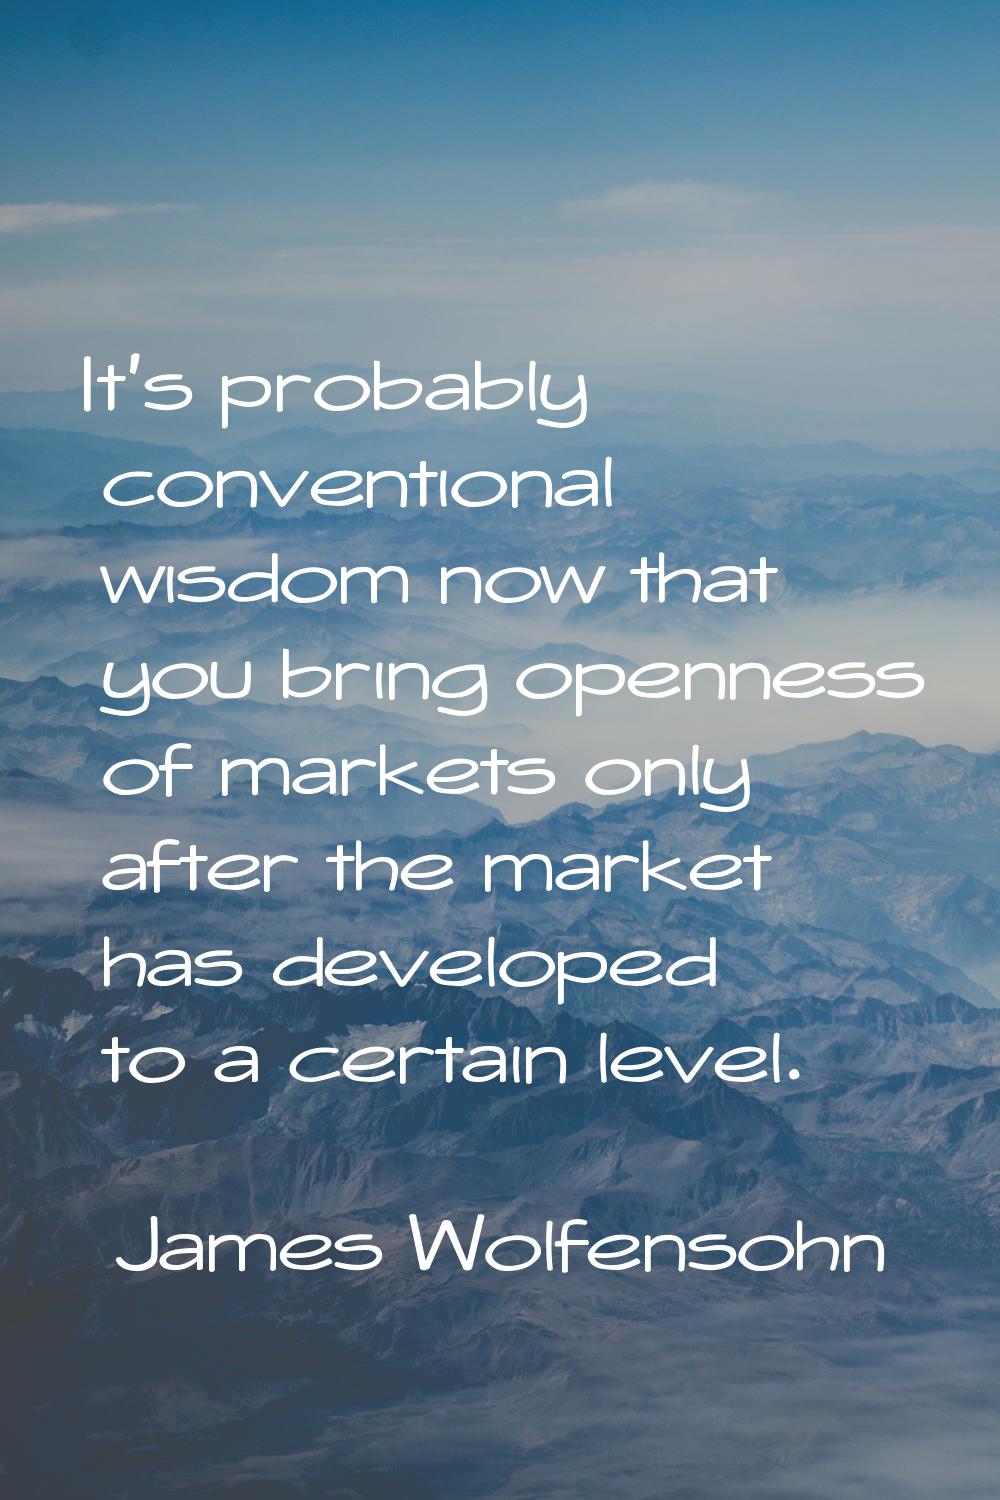 It's probably conventional wisdom now that you bring openness of markets only after the market has 